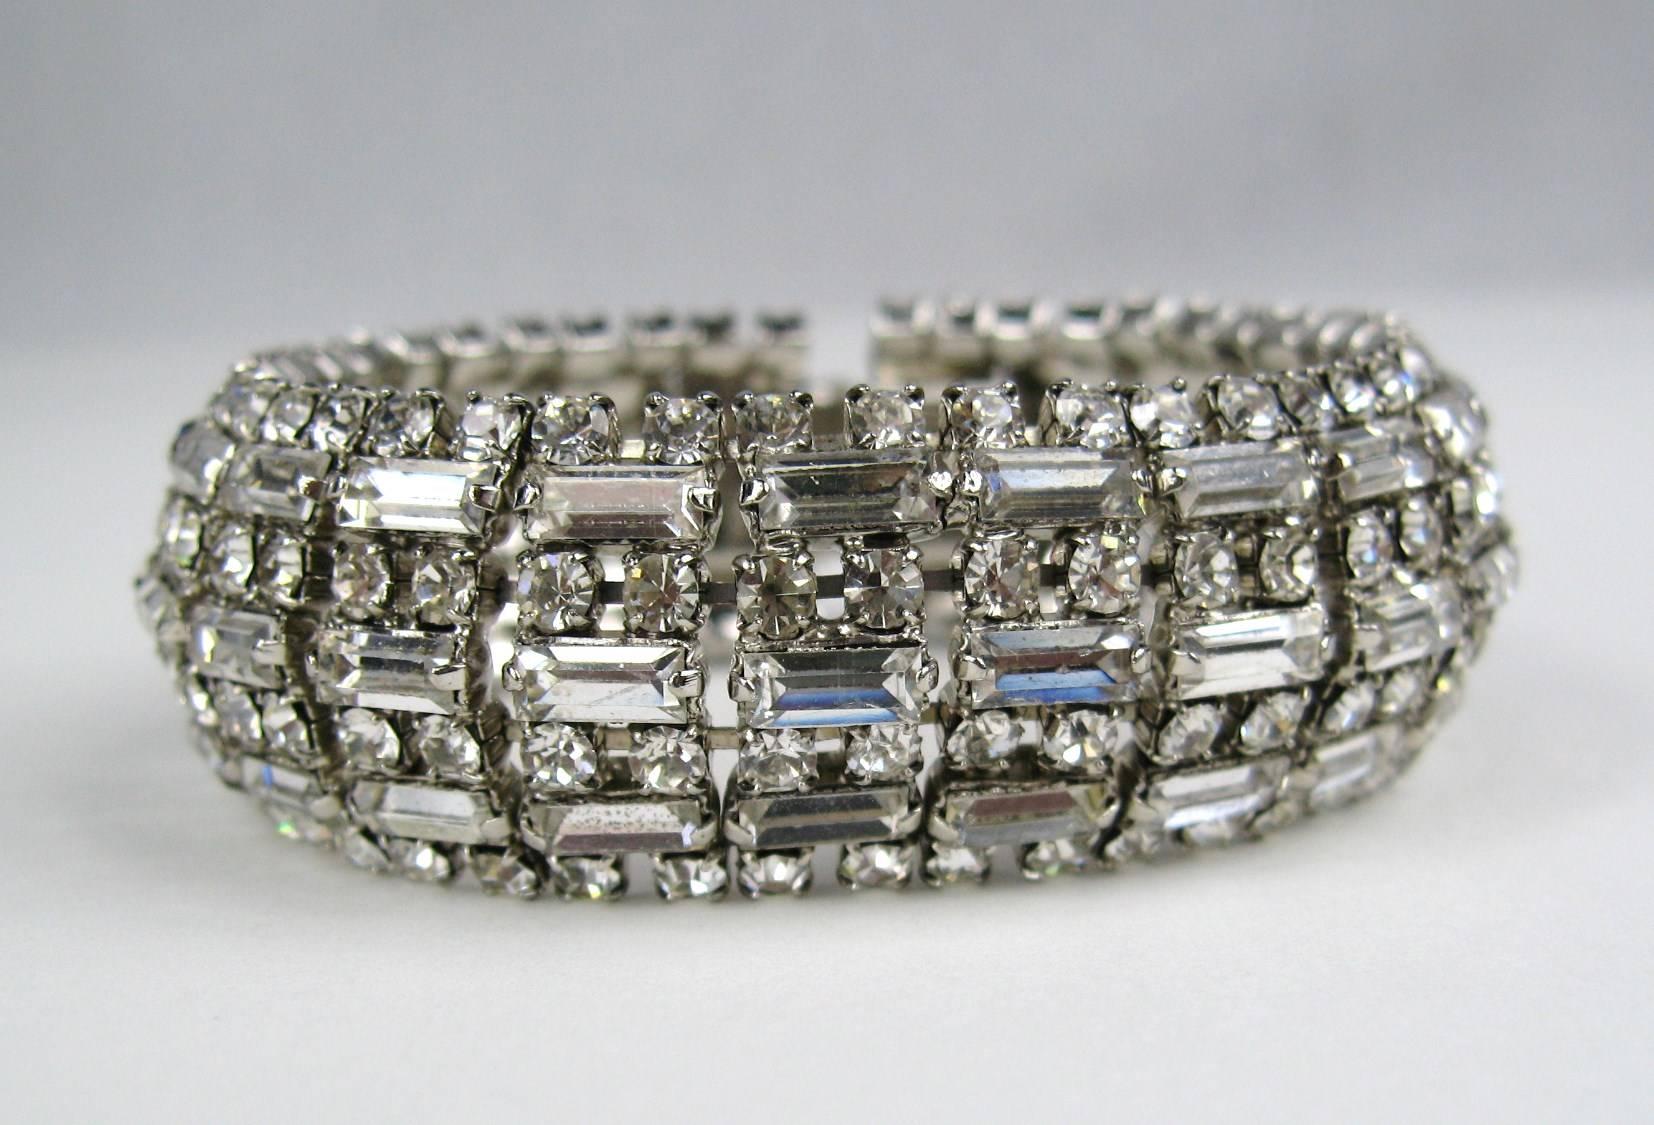 Stunning Wide Crystal Rhinestone Silver  Bracelet. Measuring .87 inches wide. Has a Slide-in clasp. 7.25 inches long to clasp. White Gilt Metal. This piece is unsigned, however, our client has attributed it Barrera. This is out of a massive